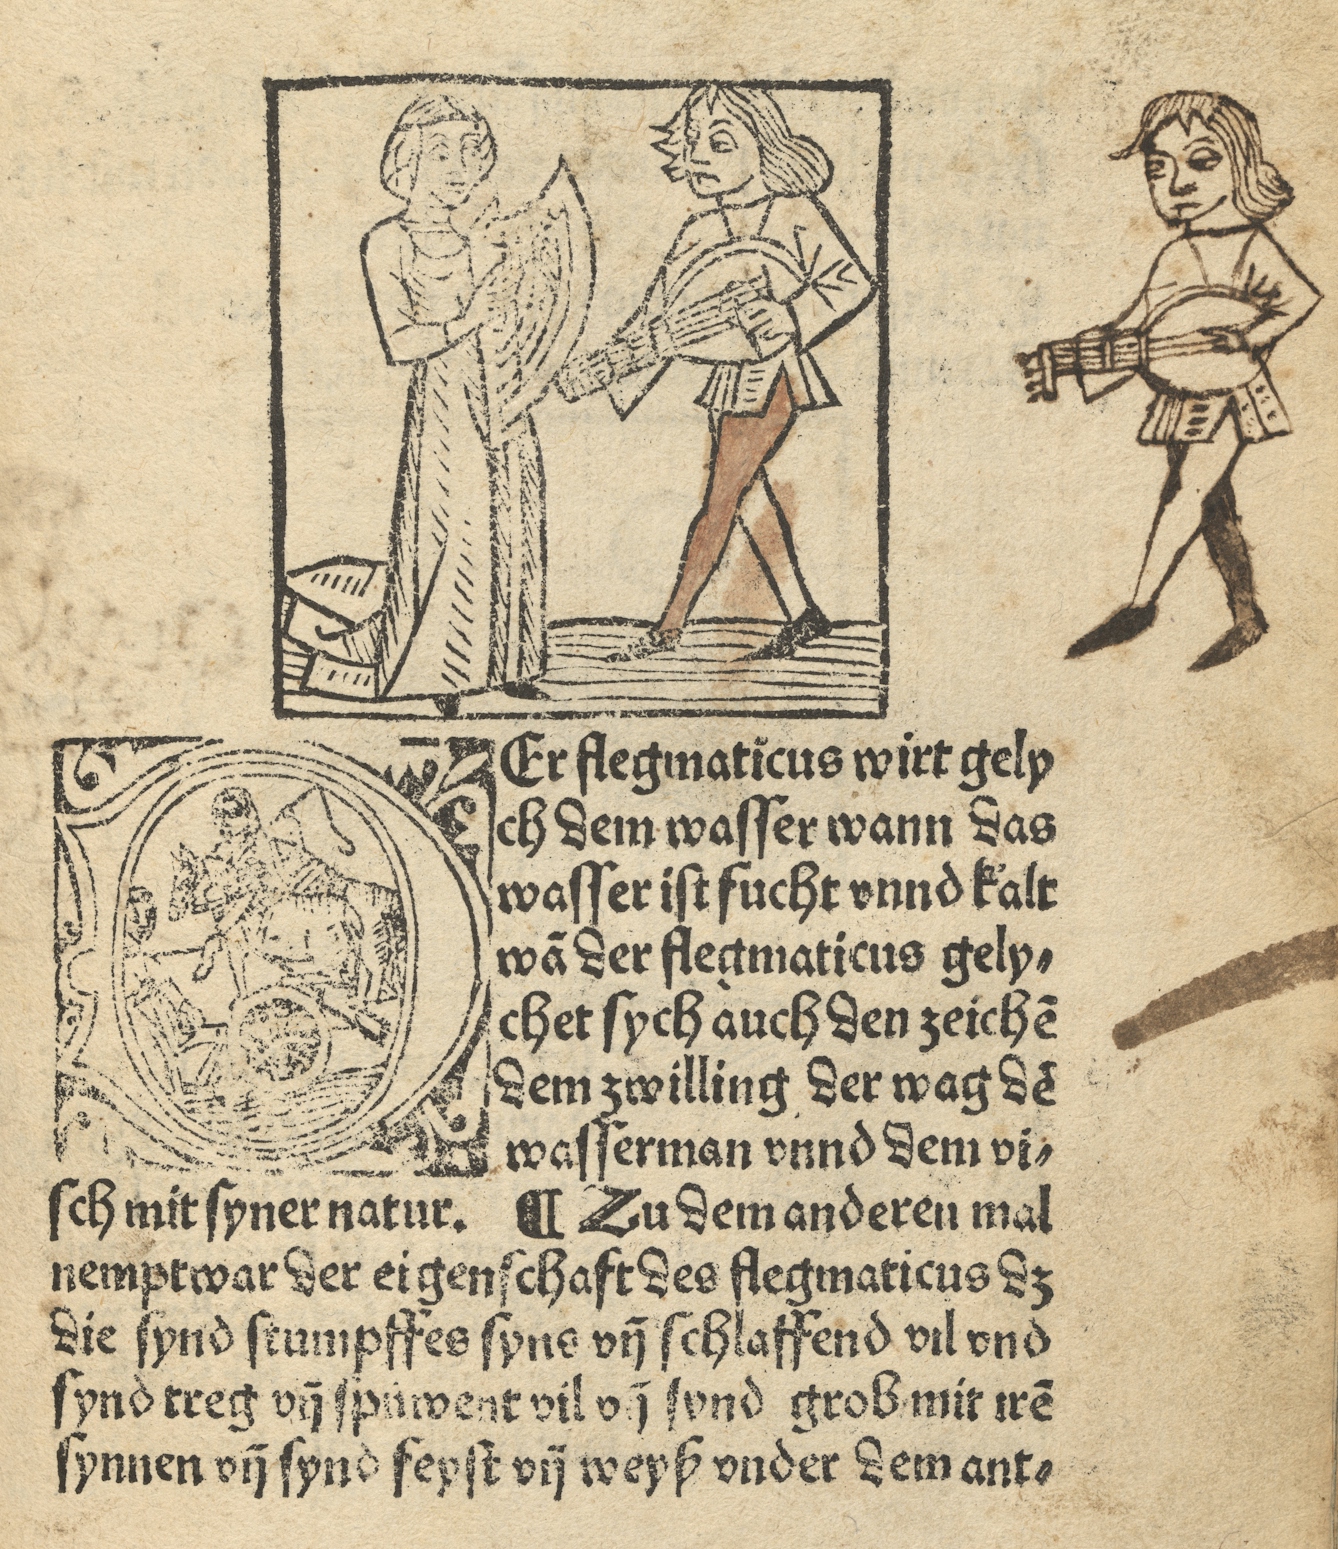 Photograph of a page from an early printed book where a previous owner has had a go at copying an illustration of man playing a guitar like instrument.